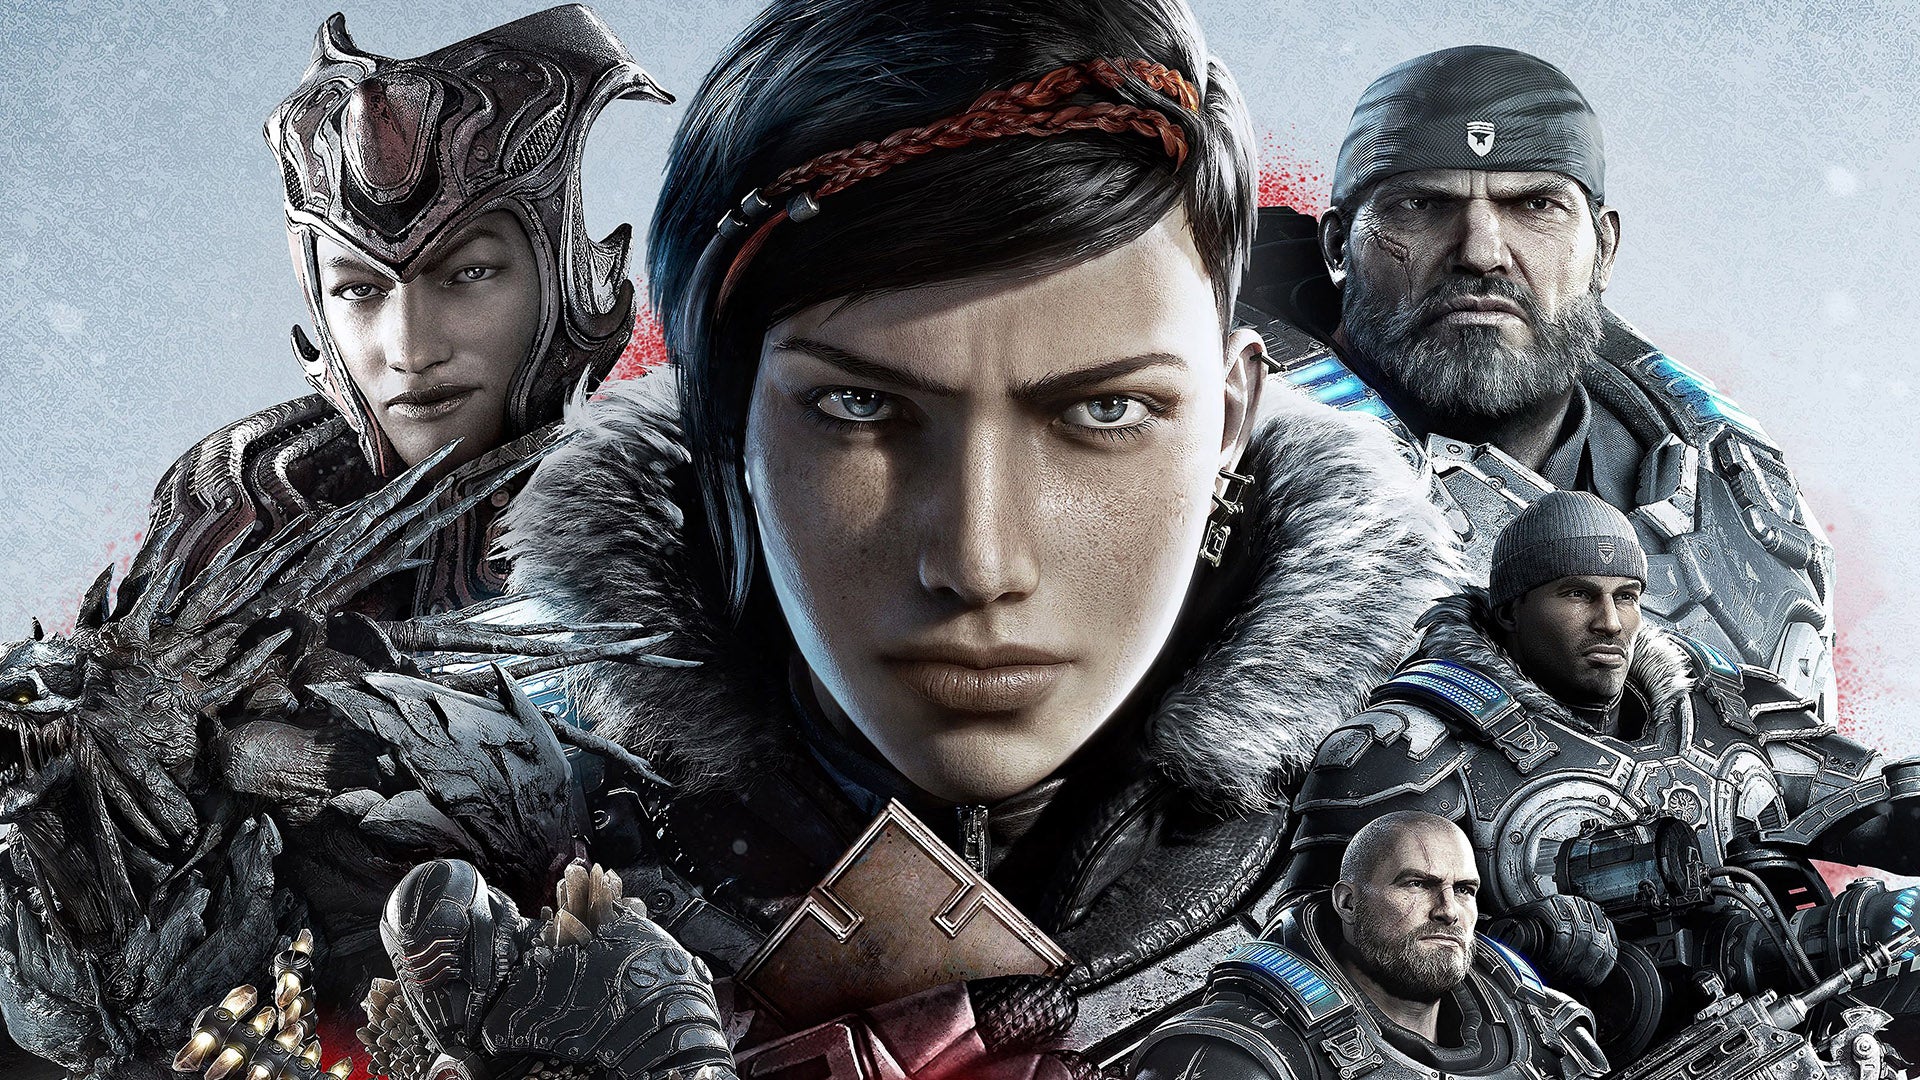 Image for Gears 5 Upgrades For Xbox Series X Tested - Enhanced Graphics, 120Hz, Lower Latency + More!